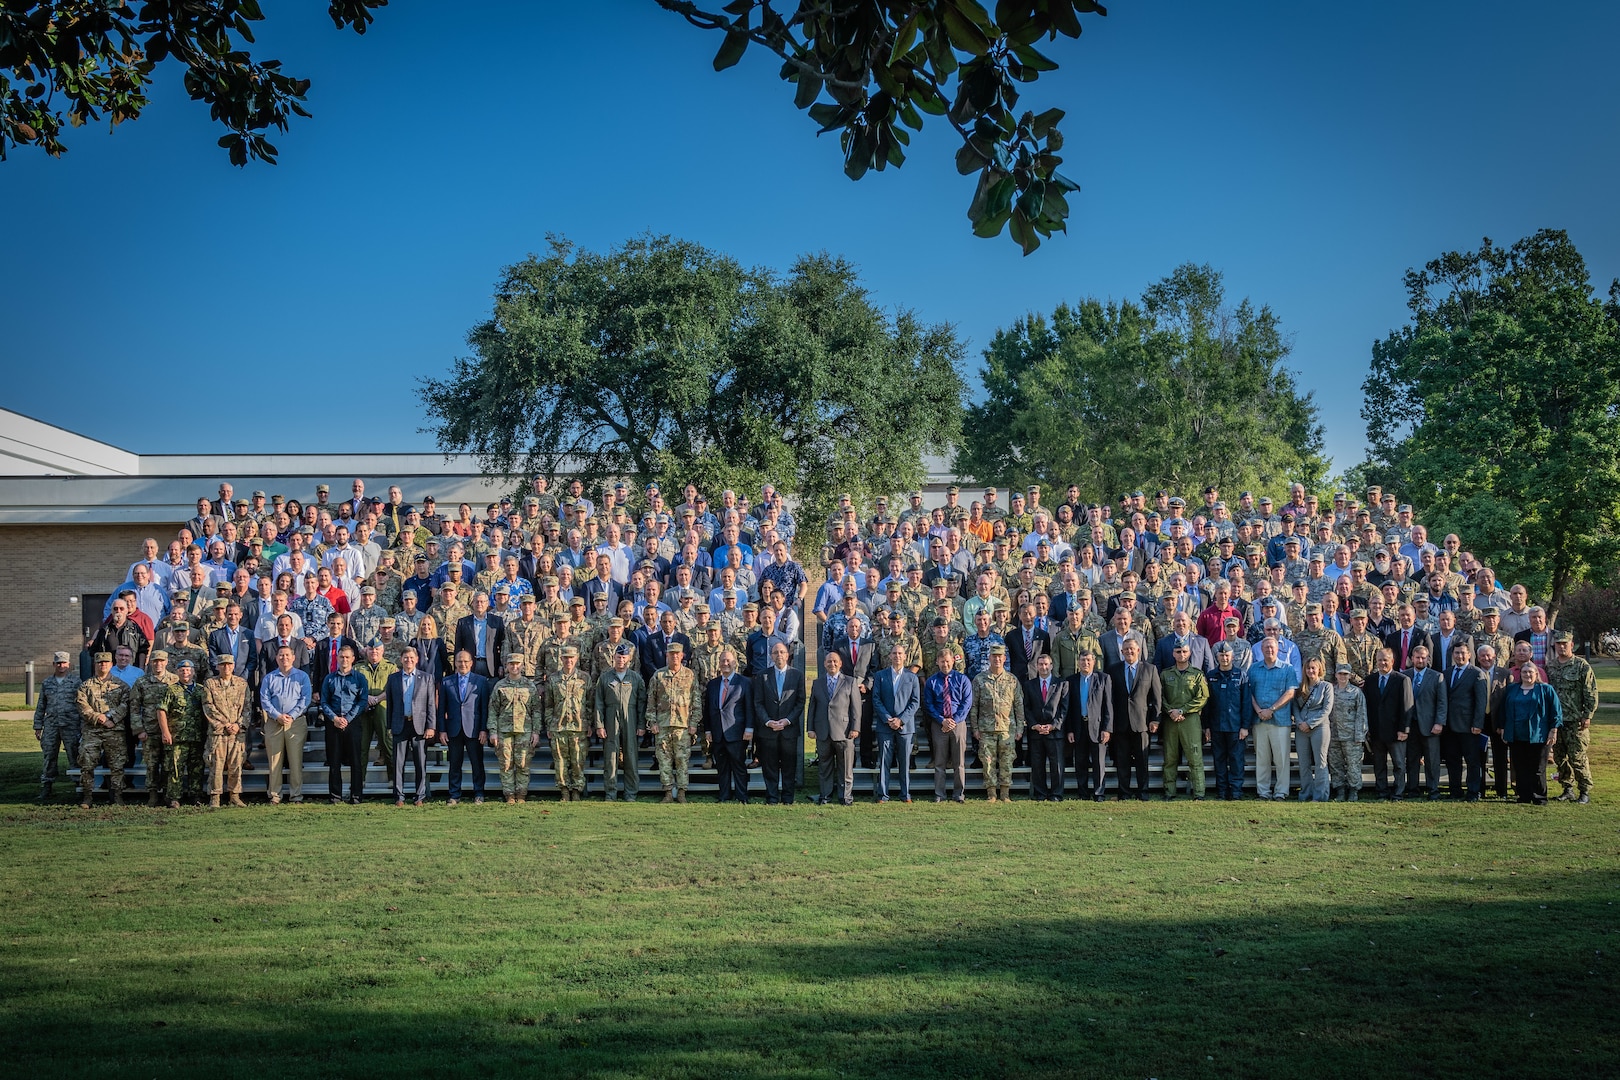 Gen. John W. “Jay” Raymond, United States Space Command and Air Force Space Command commander, stands with participants of Schriever Wargame 2019. More than 350 military and civilian experts from 27 agencies around the country, as well as Australia, Canada, New Zealand and the United Kingdom, participated in the wargame to explore multi-domain space operations. (U.S. Air Force photo by Trey Ward)